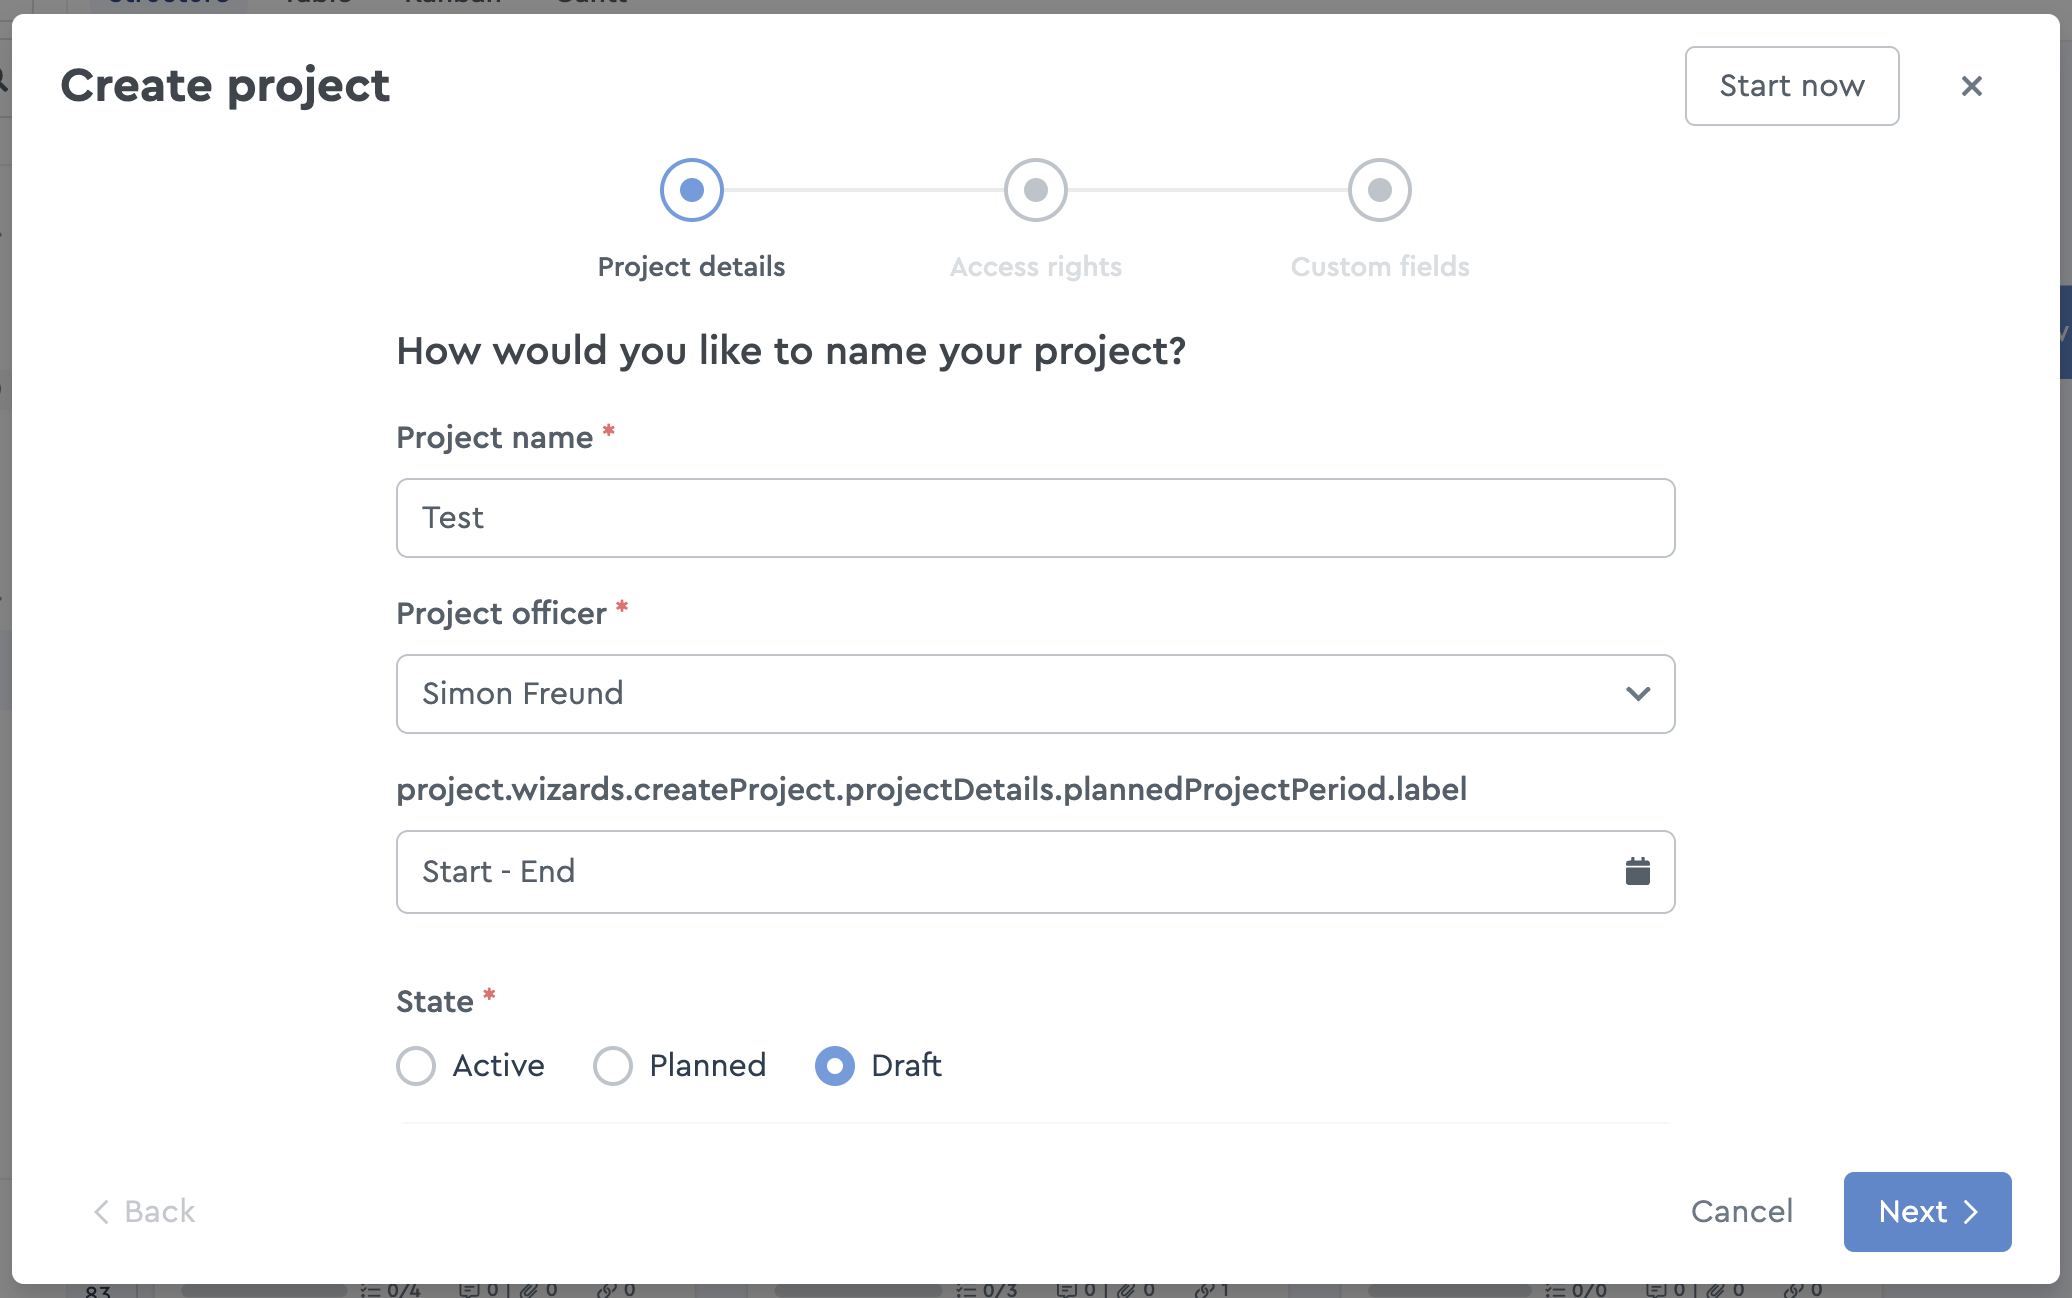 Create a new project as a draft